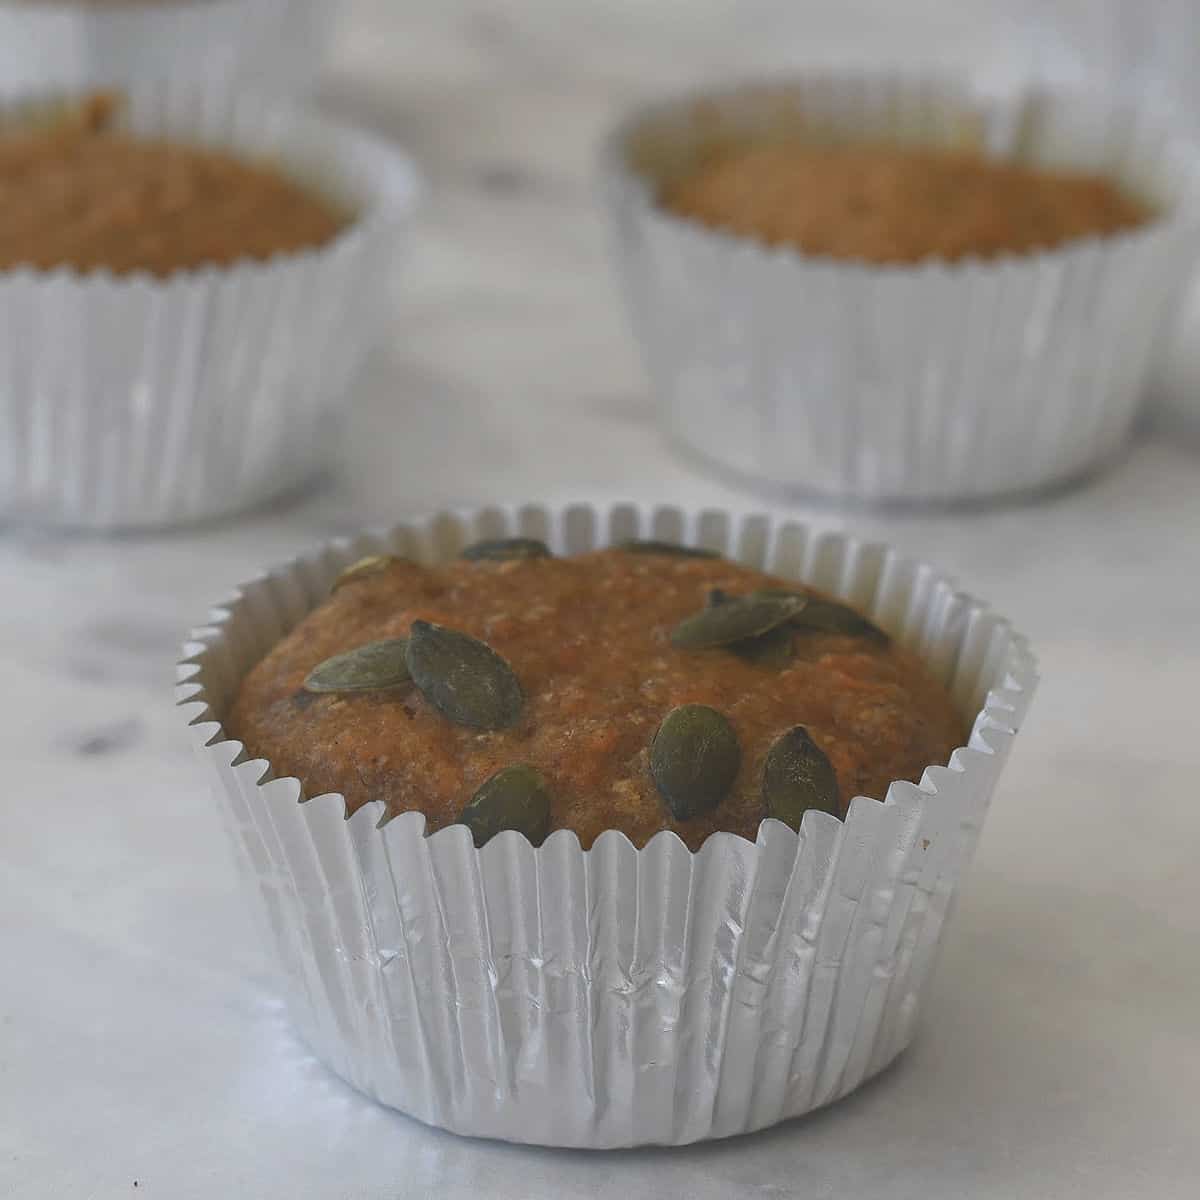 Side view of Carrot Banana and Cinnamon Muffins